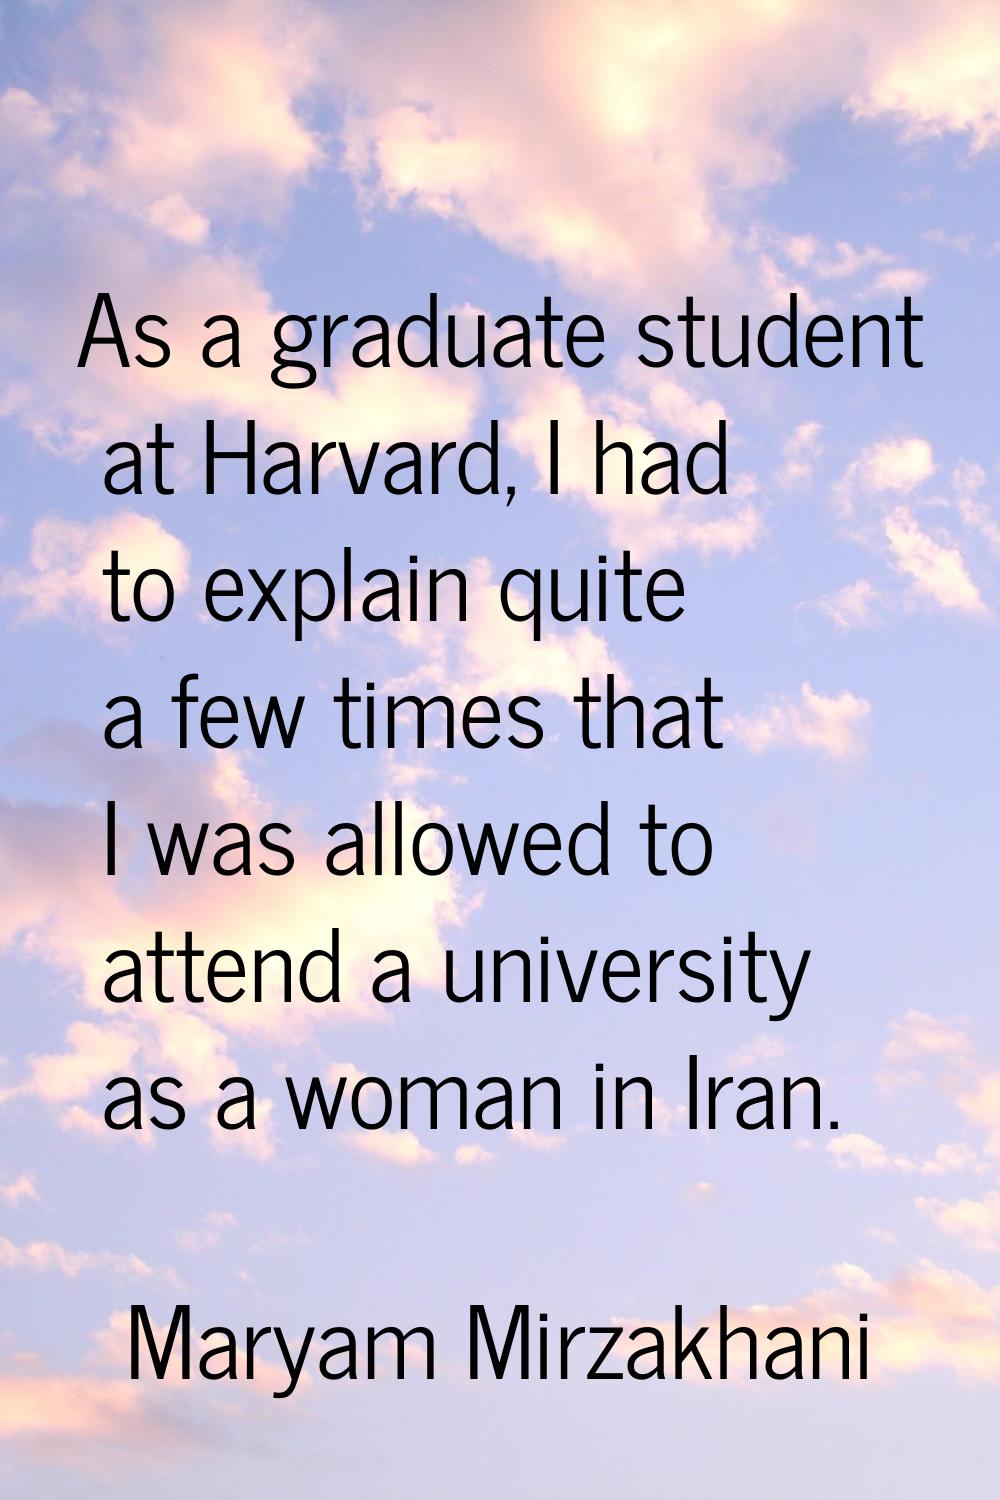 As a graduate student at Harvard, I had to explain quite a few times that I was allowed to attend a